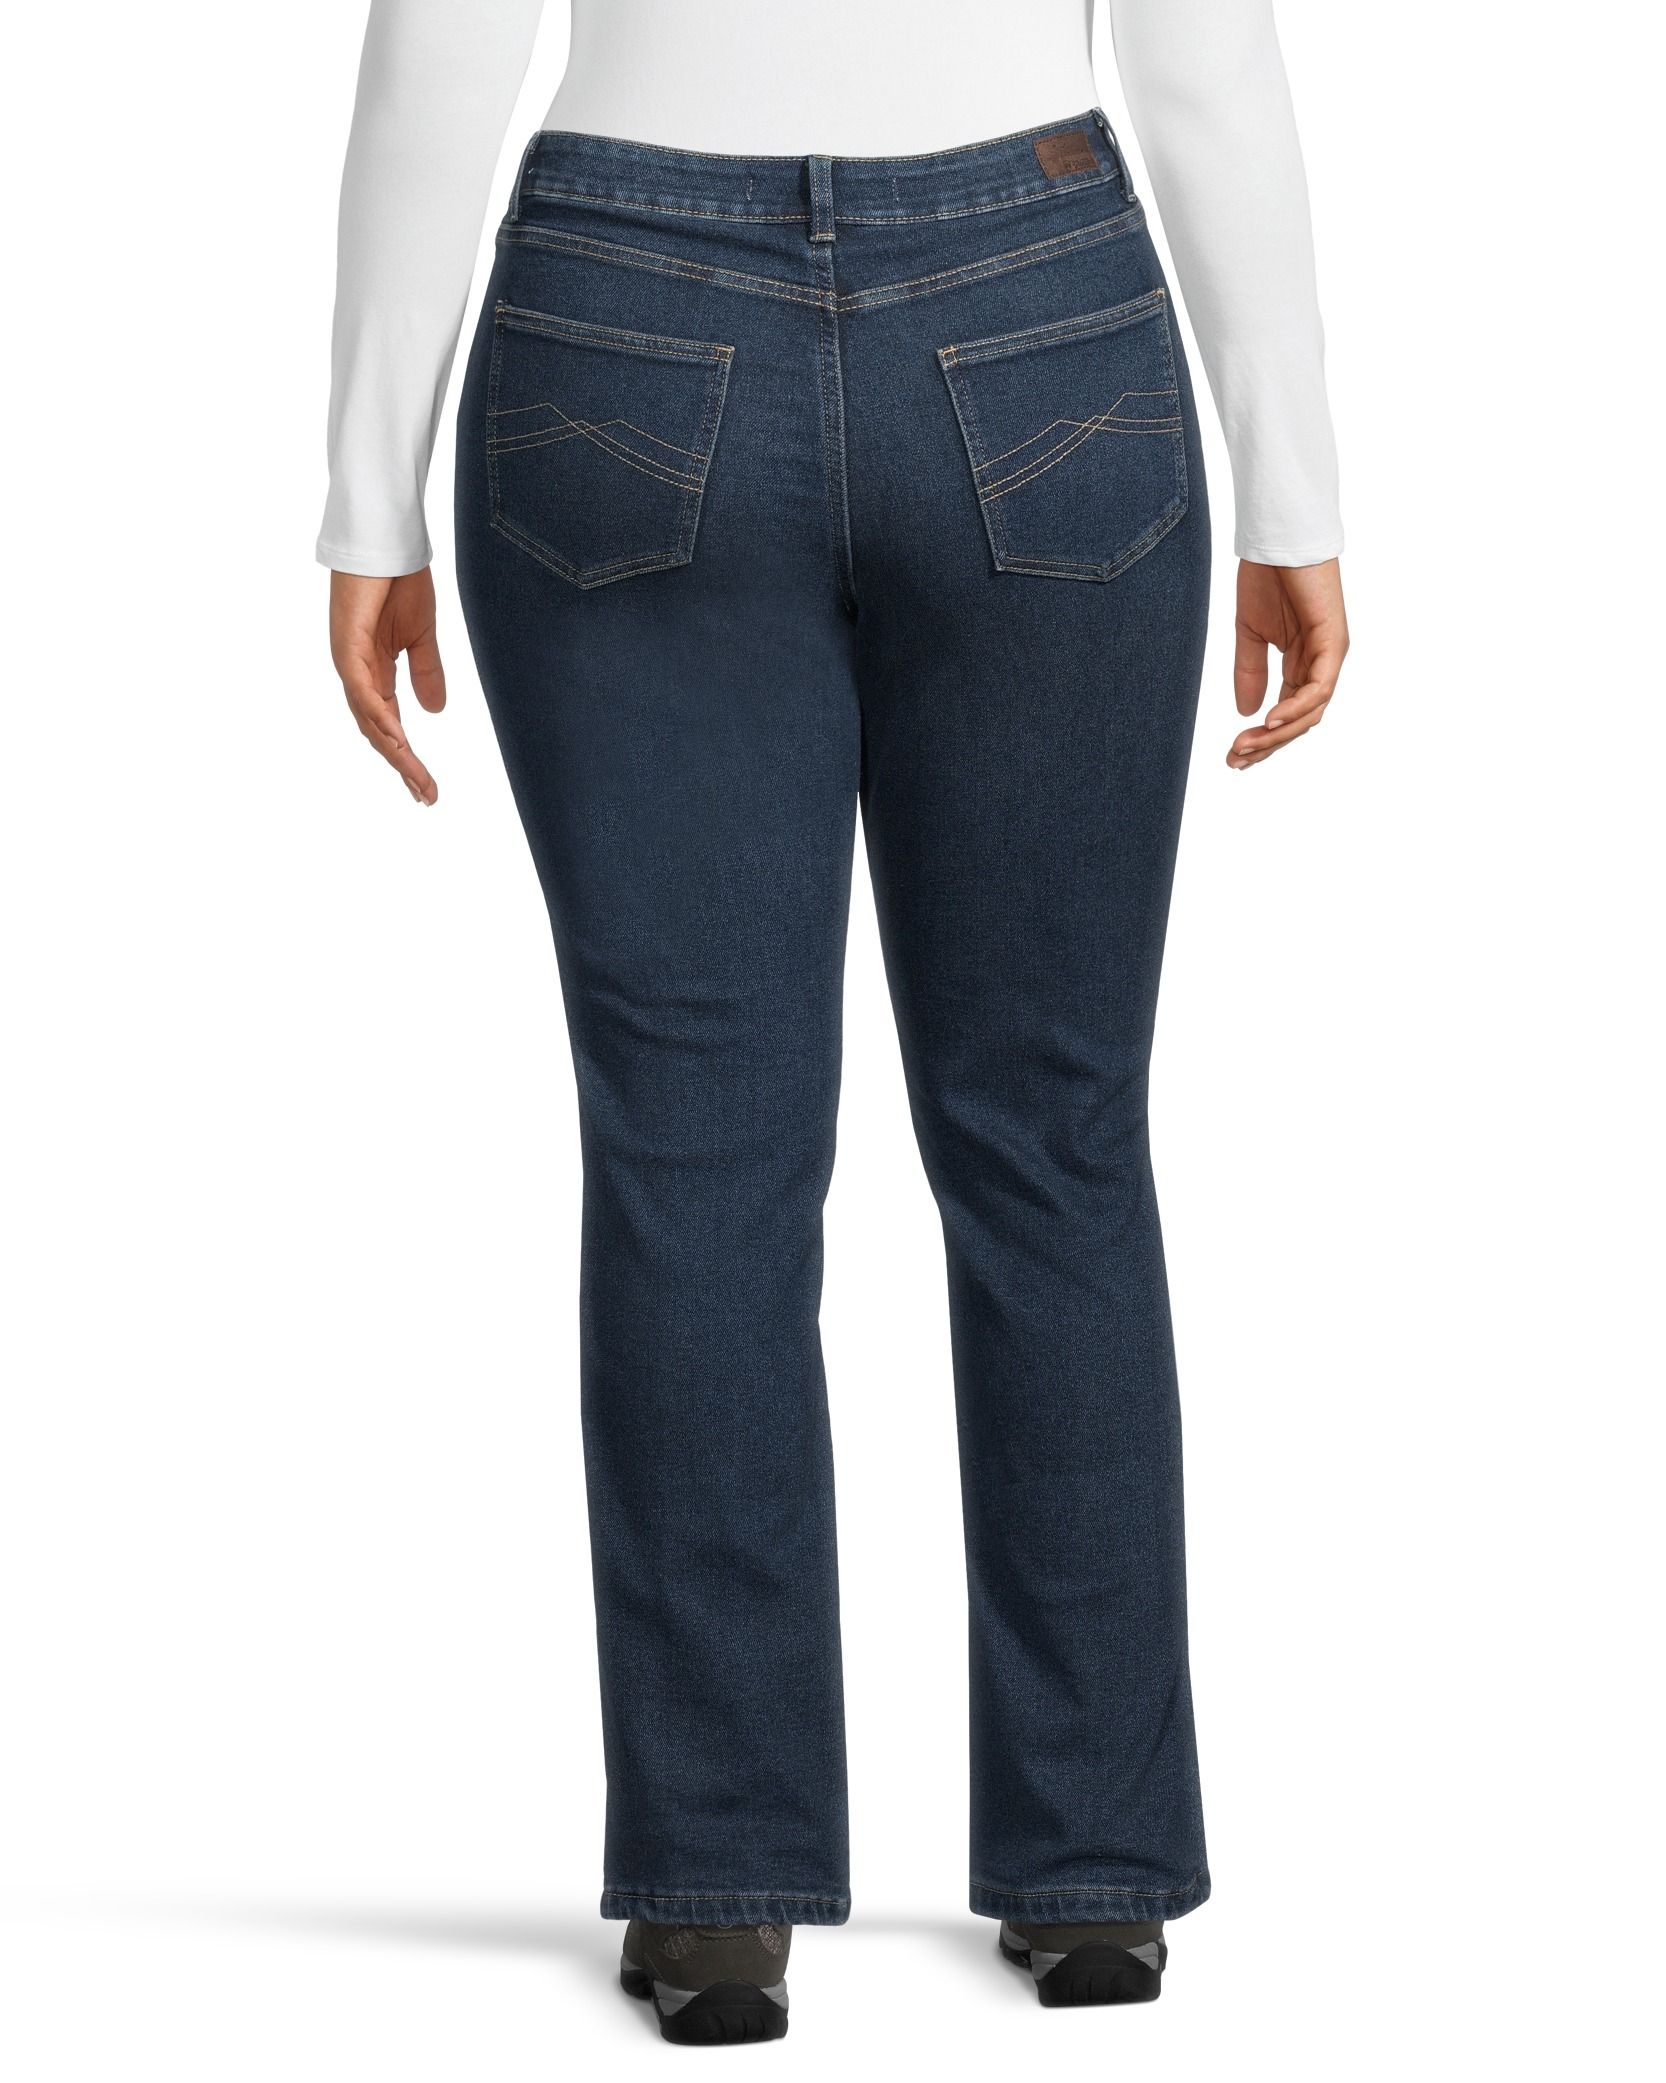 Lee Jeans for Women, Bootcut & Straight Leg Jeans